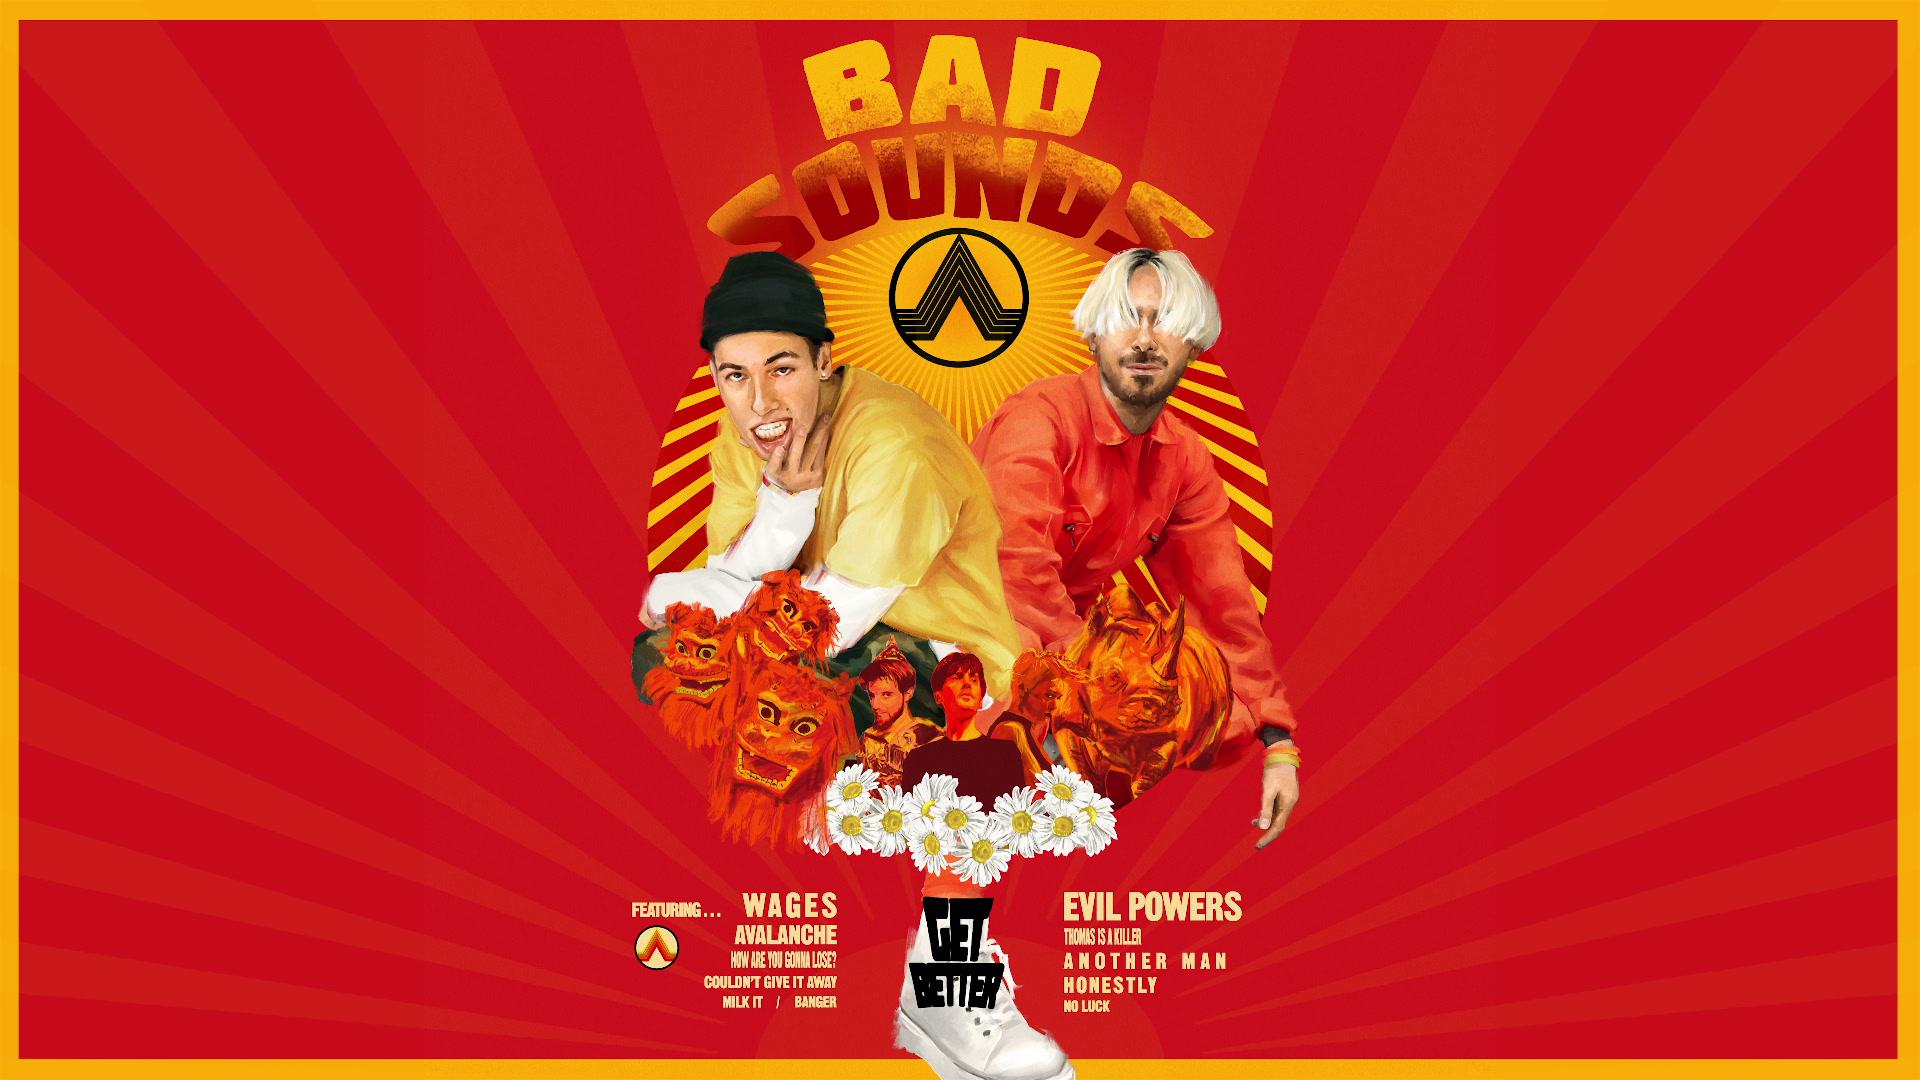 Bad Sounds - No Luck (Audio)